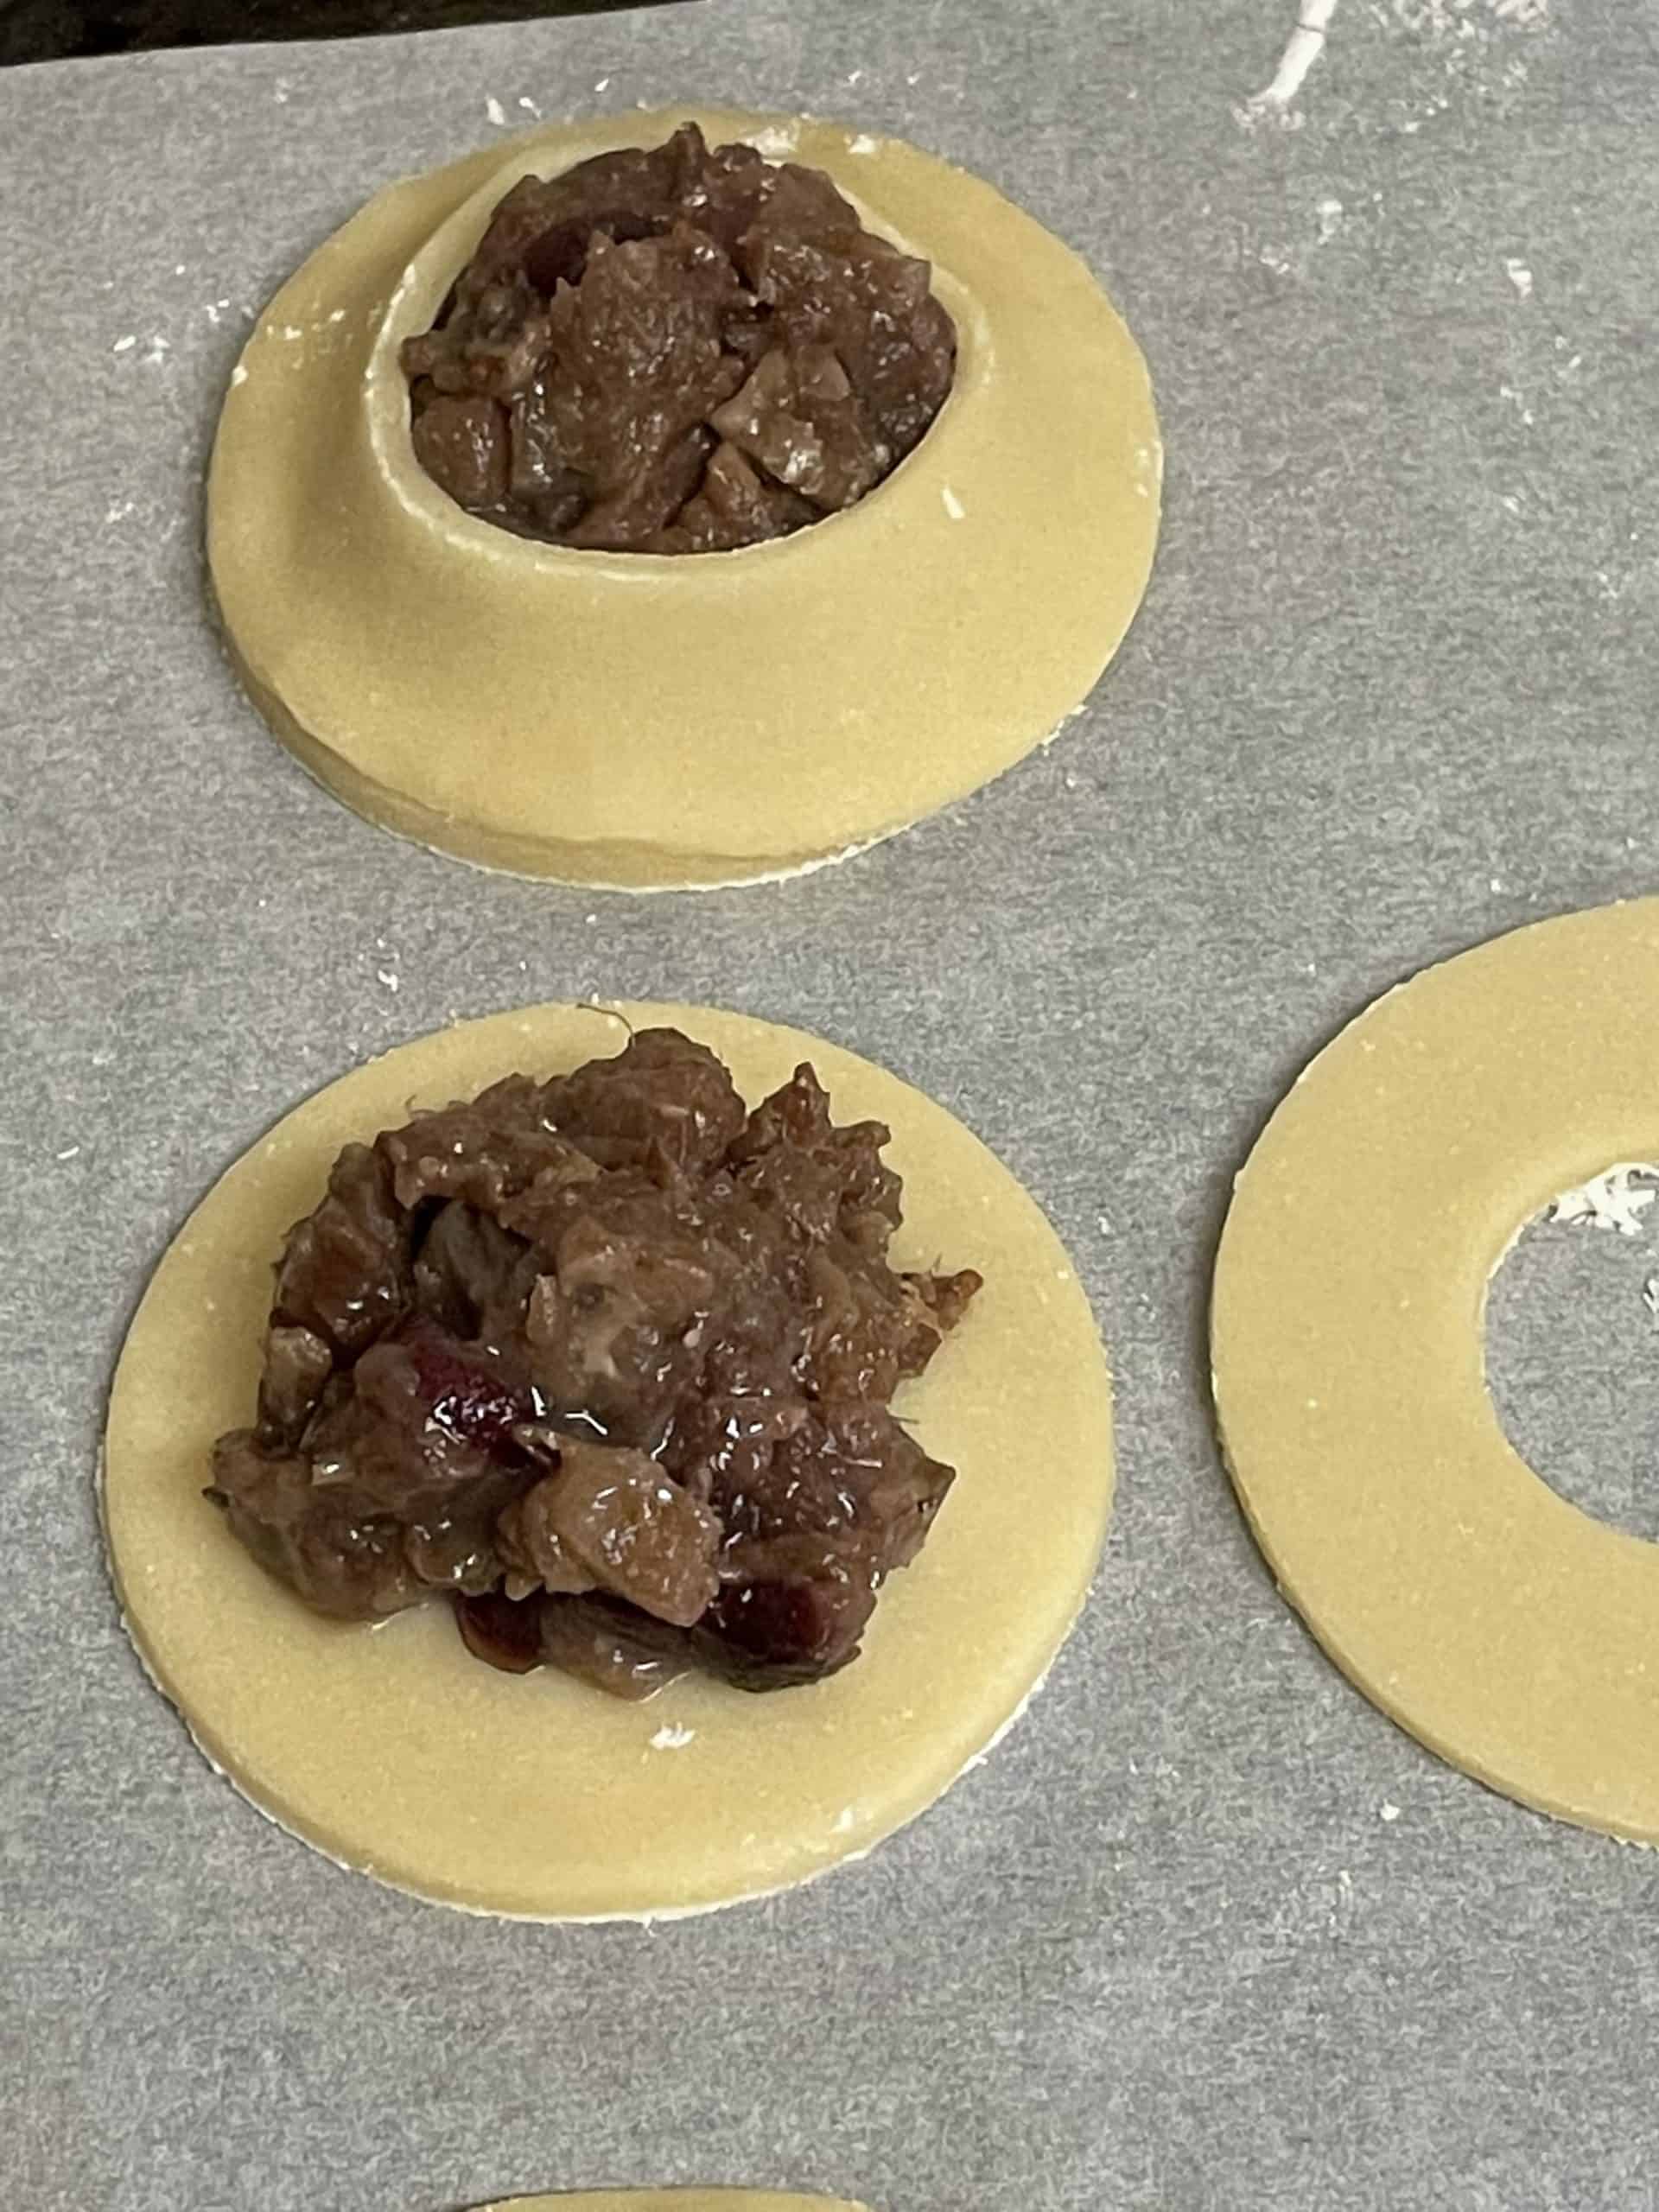 One fully assembled unbaked cranberry cookie along with the cookie parts: dough circle with filling on top along with a doughnut cut out dough piece.